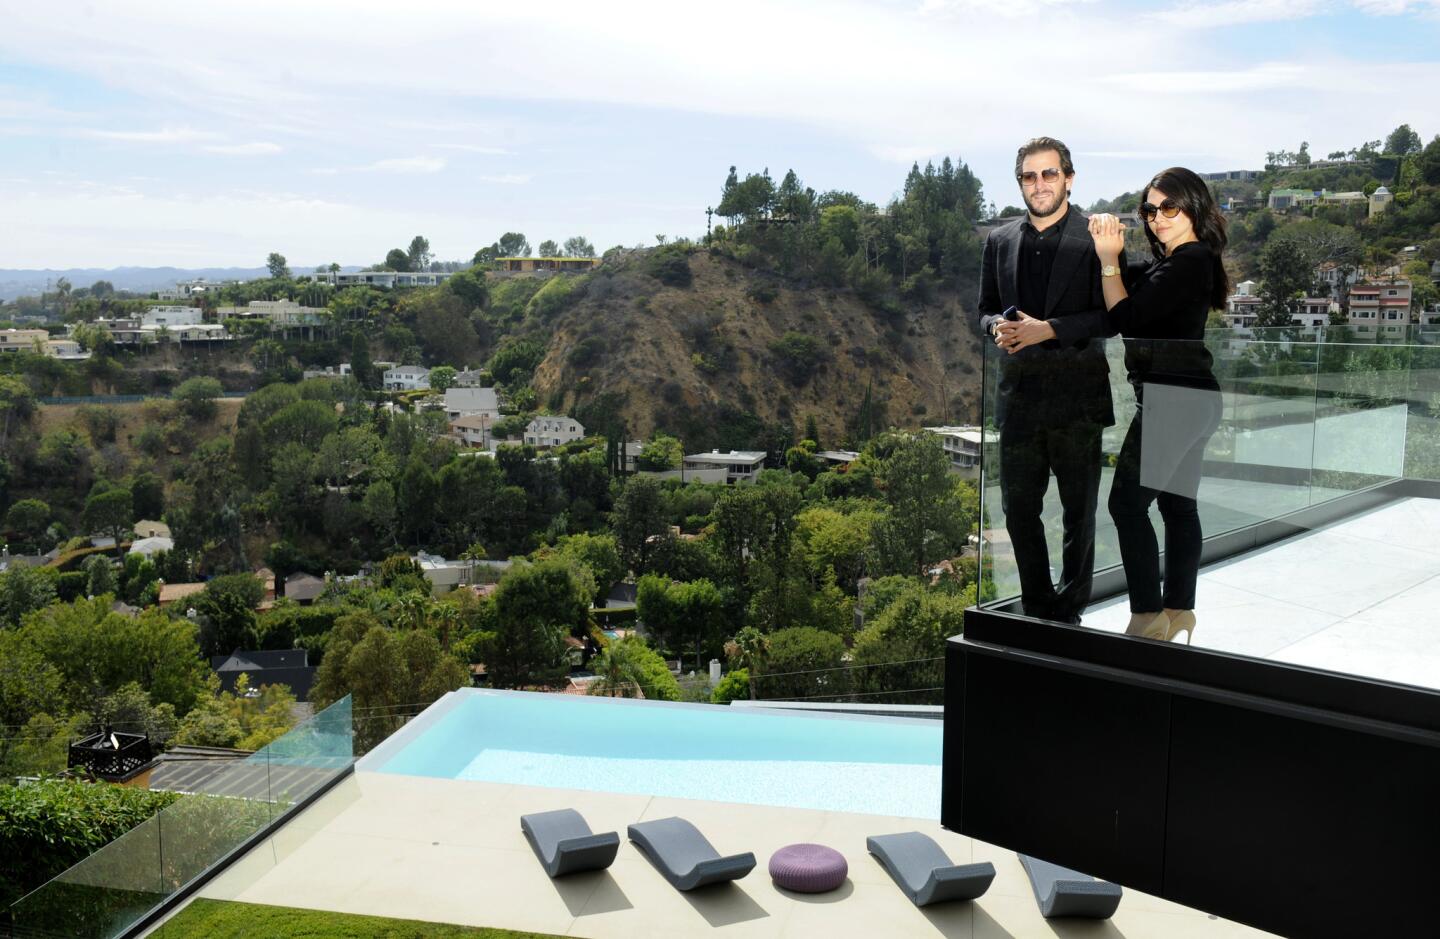 Real estate agents Branden and Rayni Williams at a $33-million mansion on Oriole Way in Los Angeles; they spent more than $40,000 on a "lifestyle film" to help market the property.